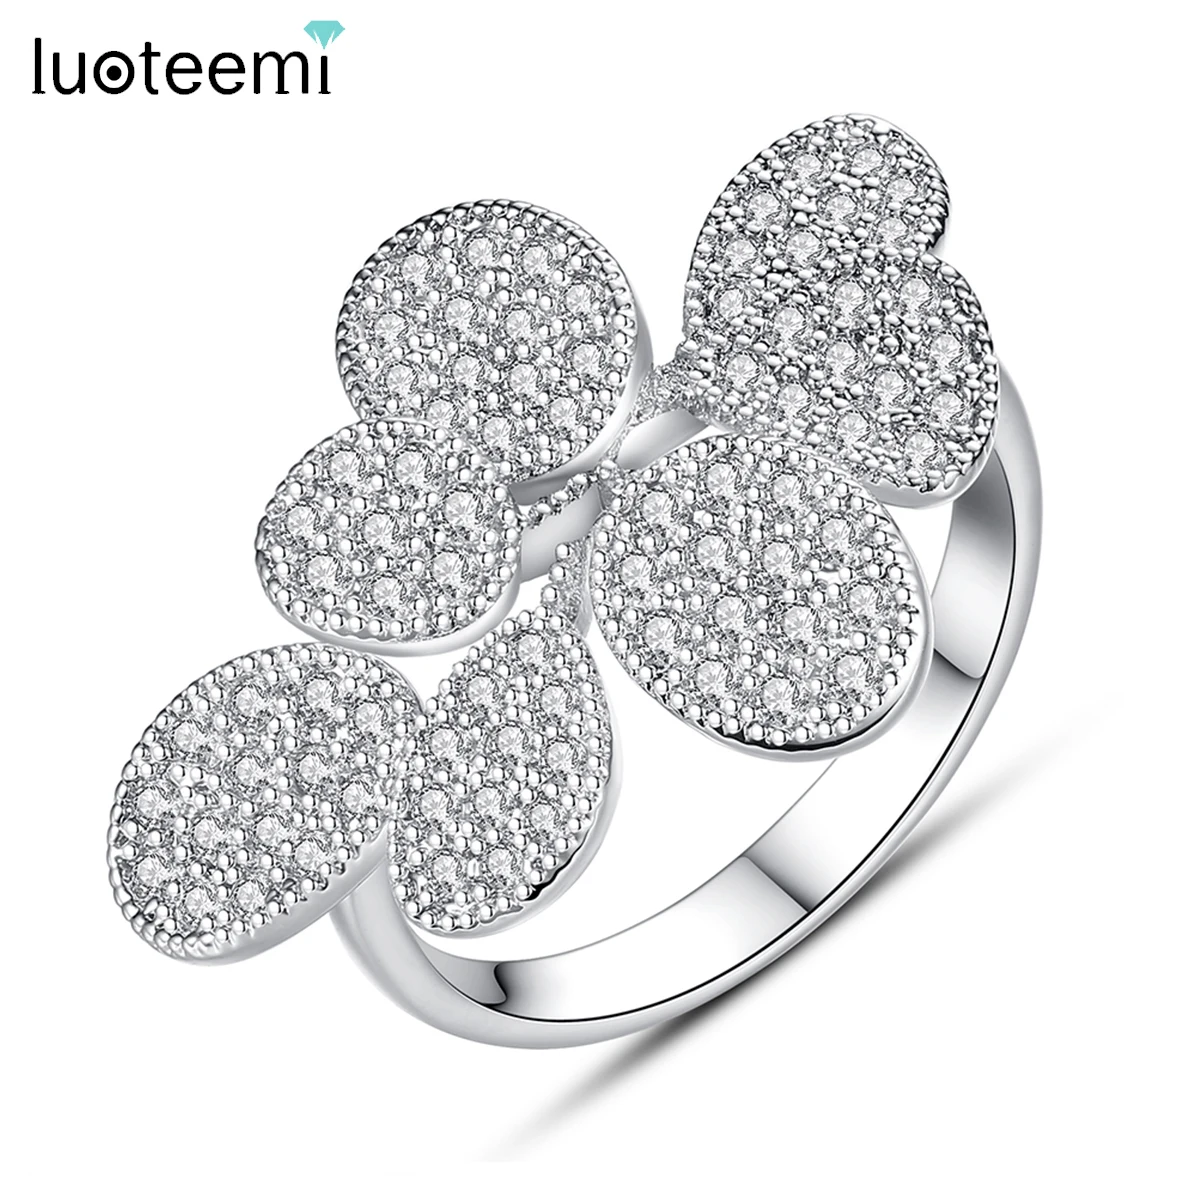 

LUOTEEMI Flower Cubic Zirconia Adjustable Ring Designer Unique Shinning Micro CZ Paved Korean Fashion Open Finger Rings Gift